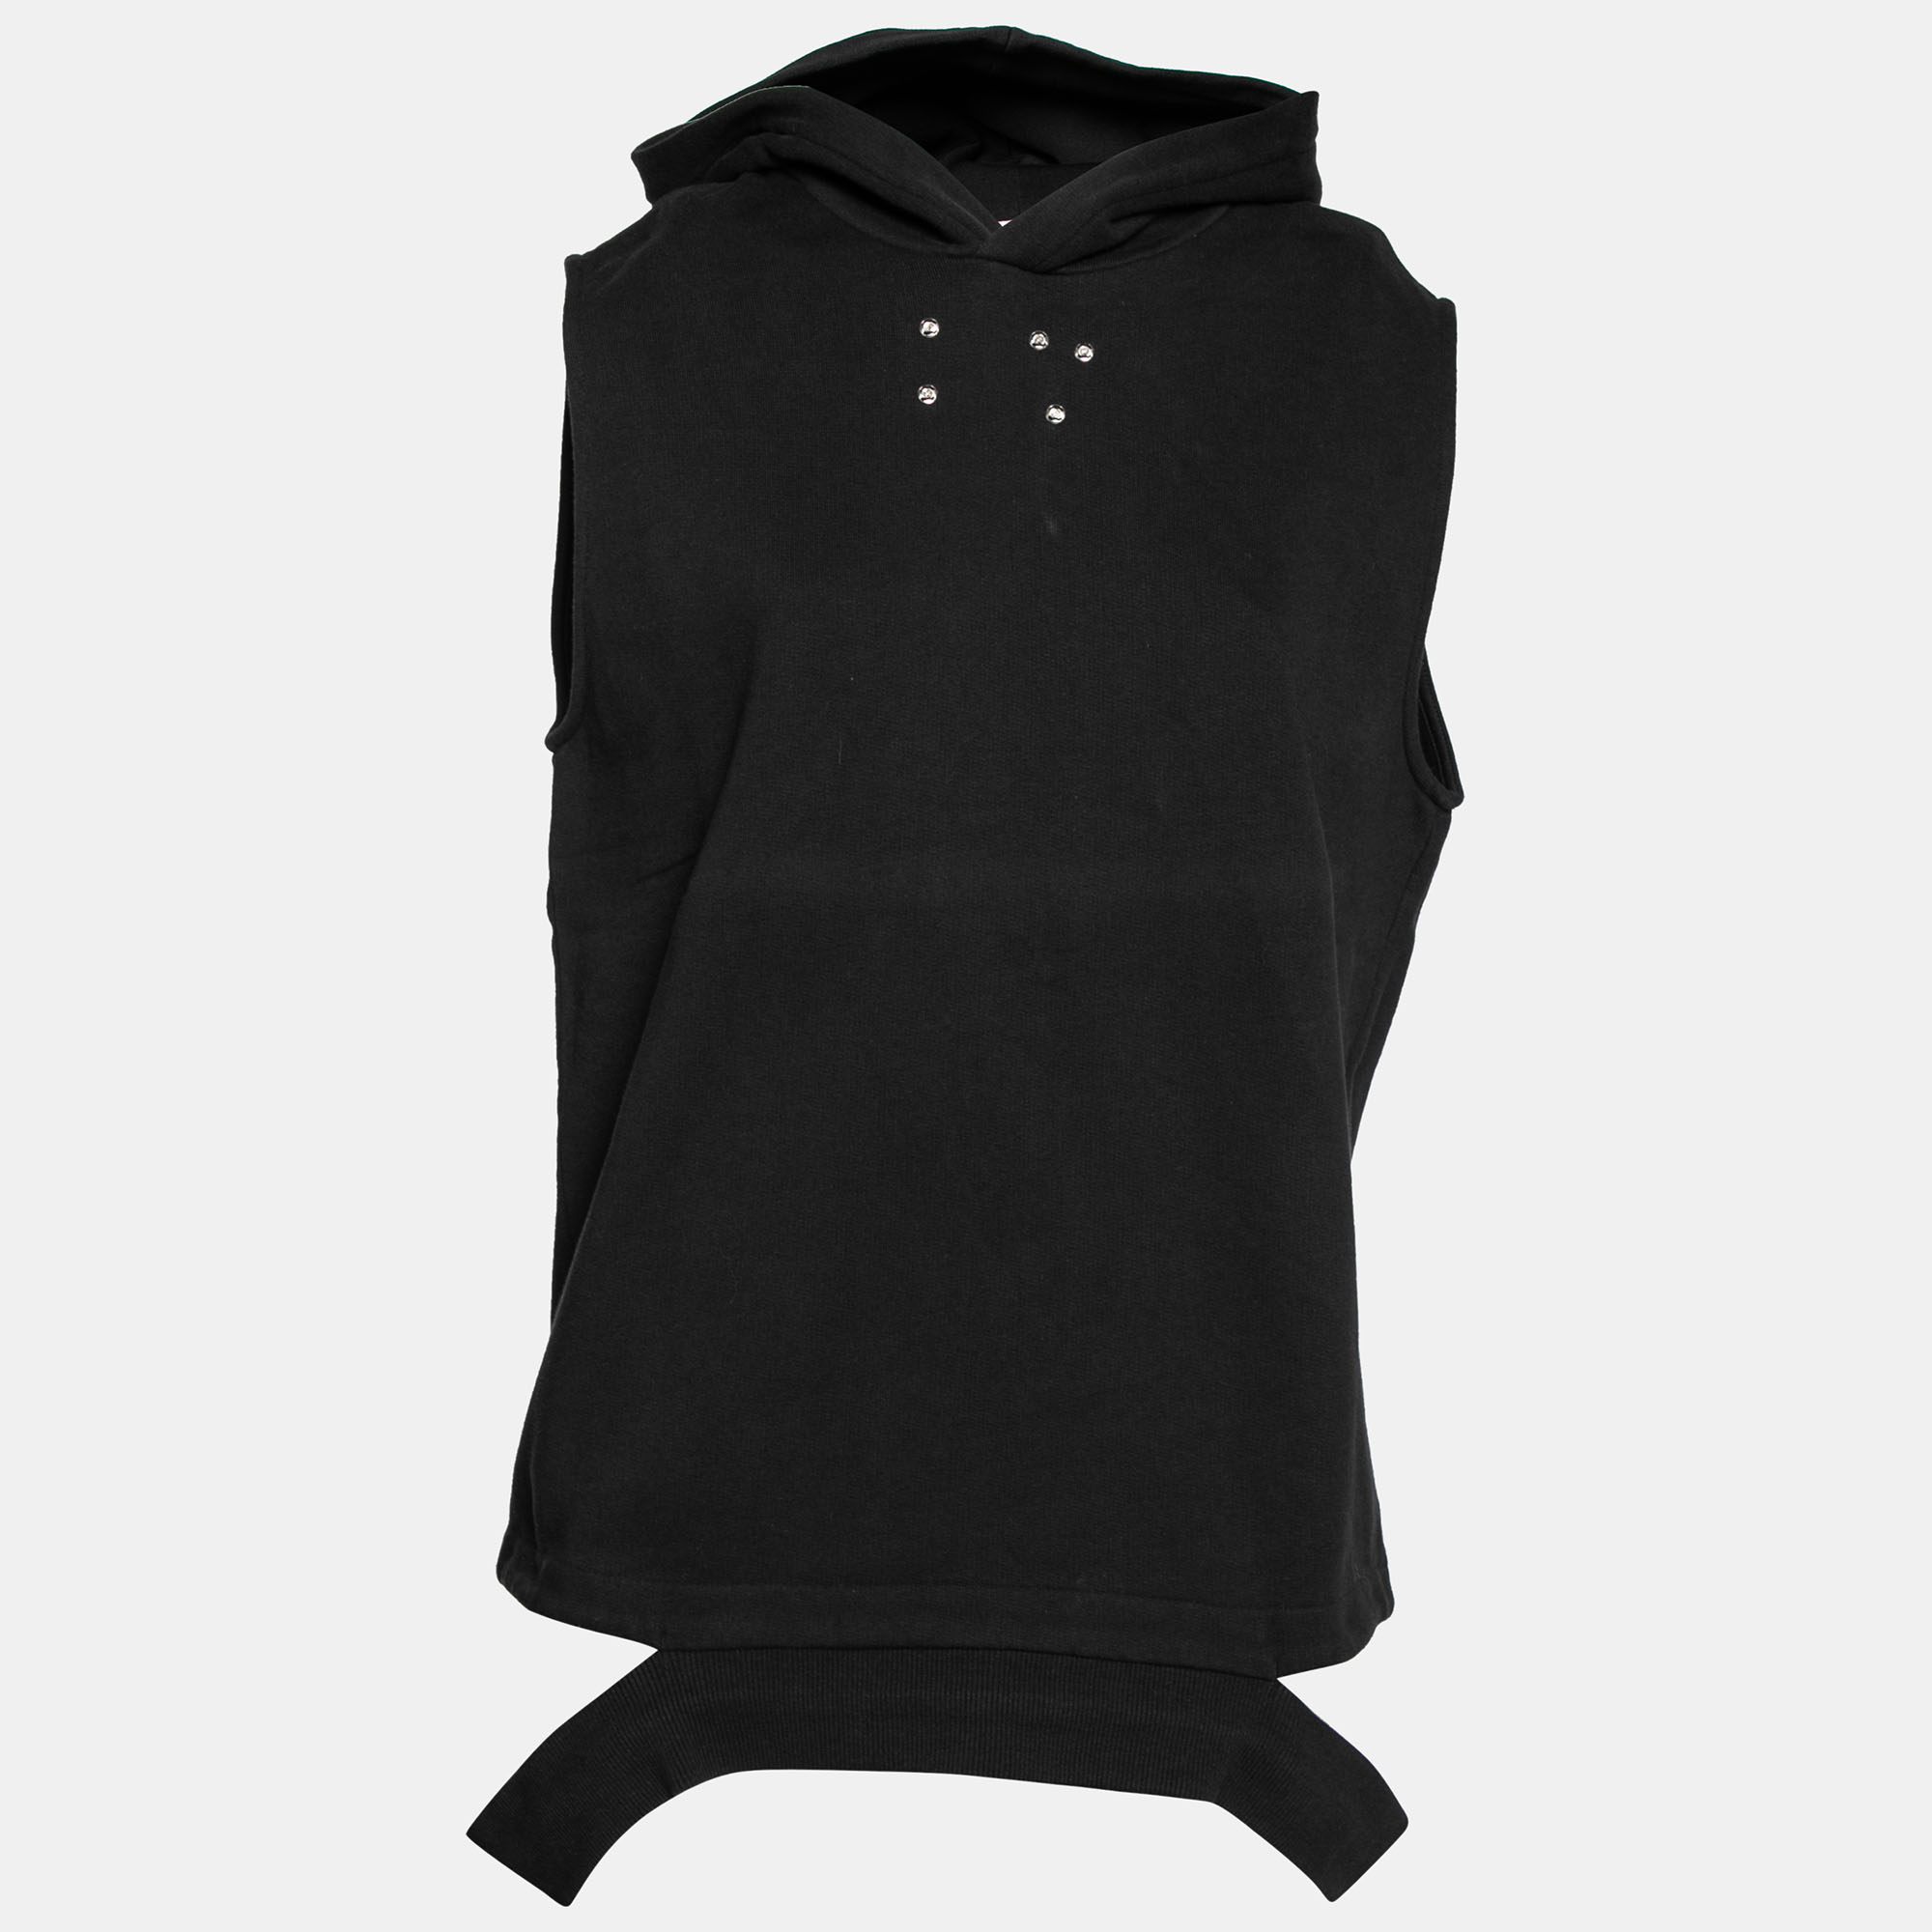 Created from a mix of quality fabrics this simple black hoodie from Givenchy has stylish cut out band details. The uber cool design is sleeveless and is ideal for relaxed outings.